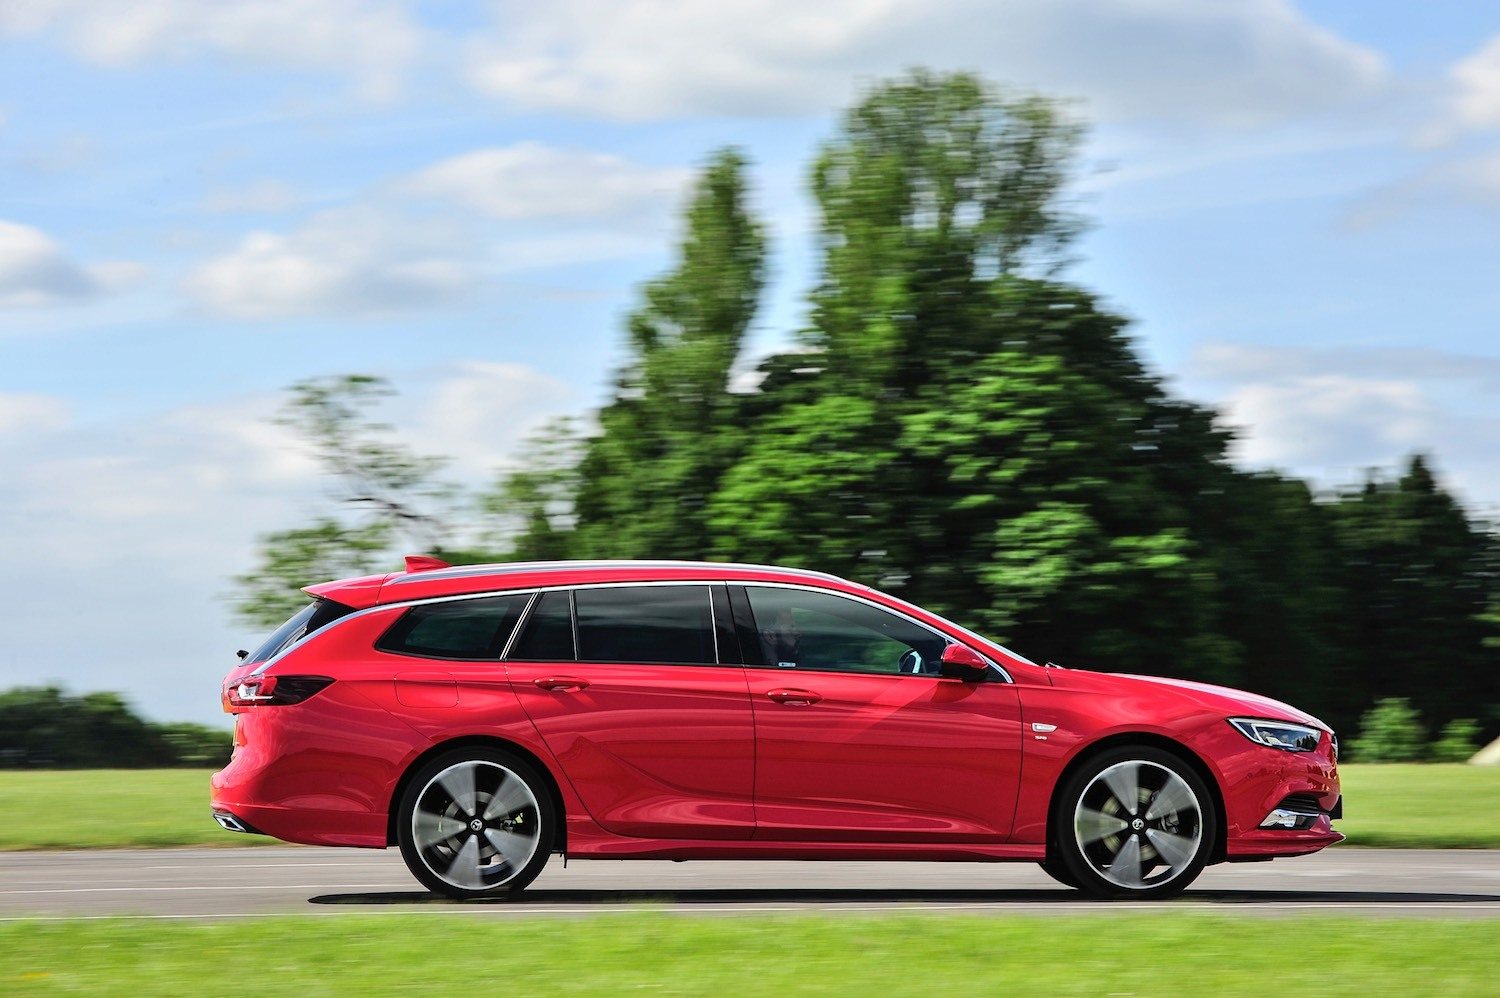 drive-Tom Scanlan Reviews the New Vauxhall Insignia Sports Tourer 5